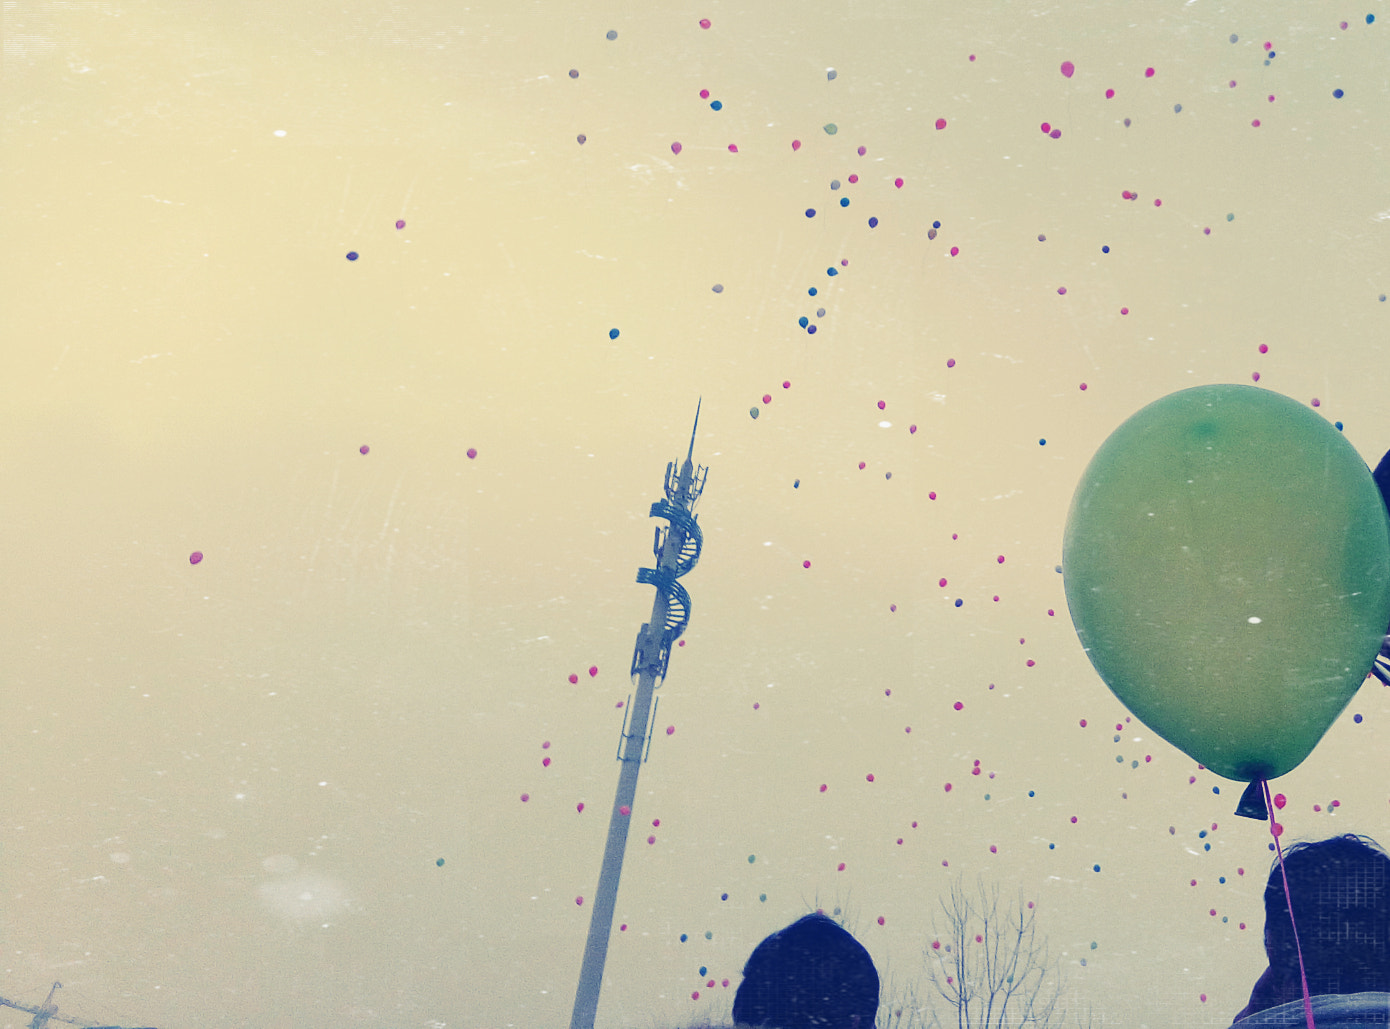 vivo Y33 sample photo. Every balloon carries a dream. photography